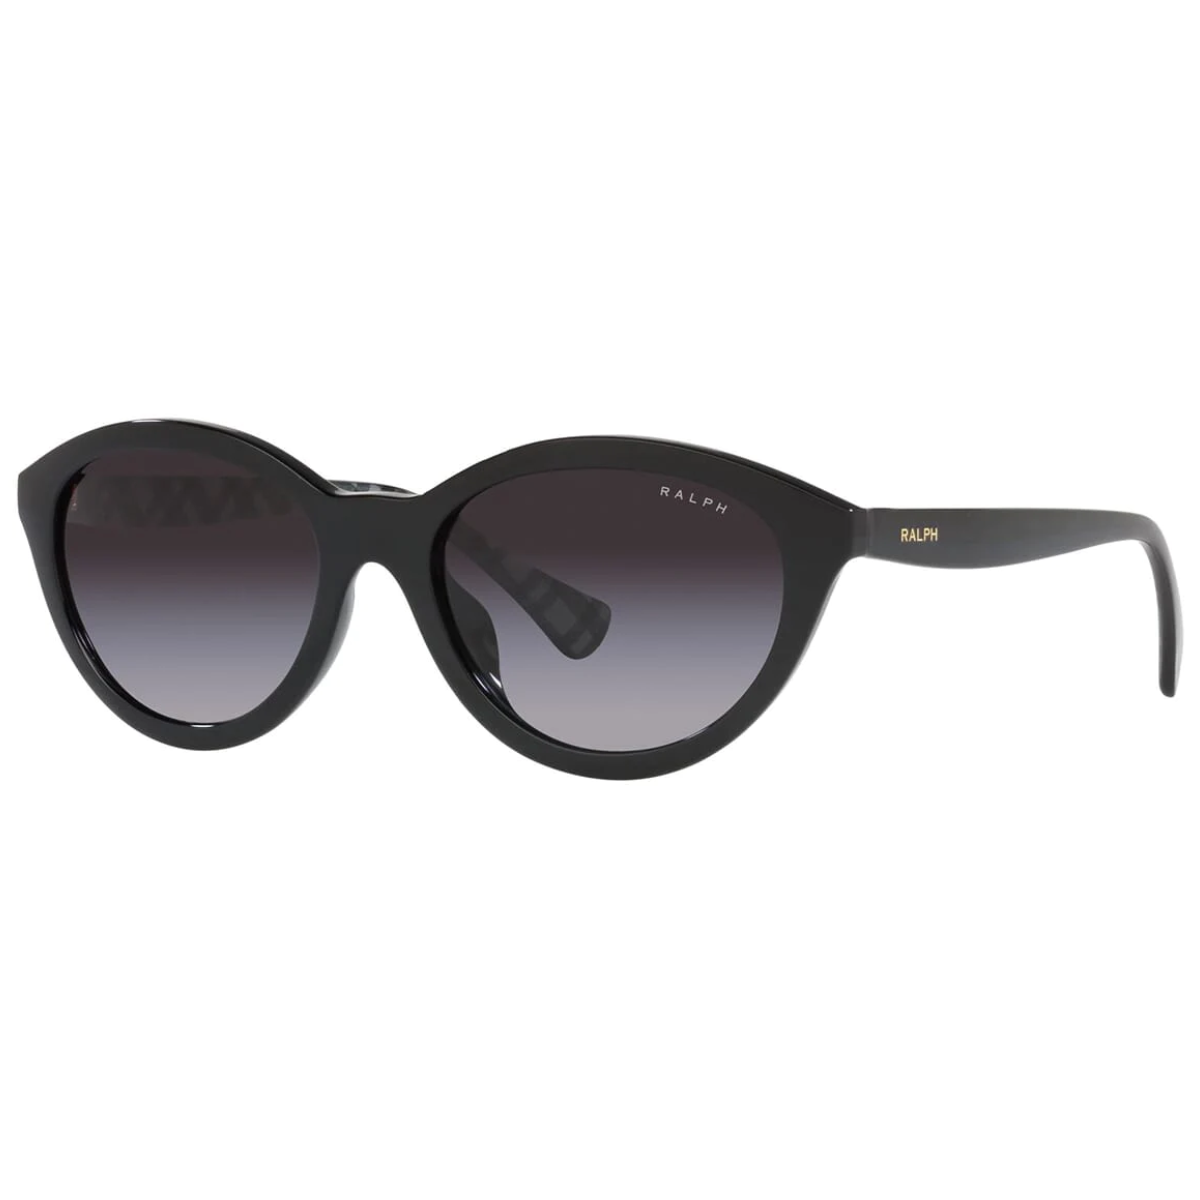 "Get the ultimate stylish sunglasses for women with Ralph Lauren Polo oval sunglasses at Optorium. Shop now!"